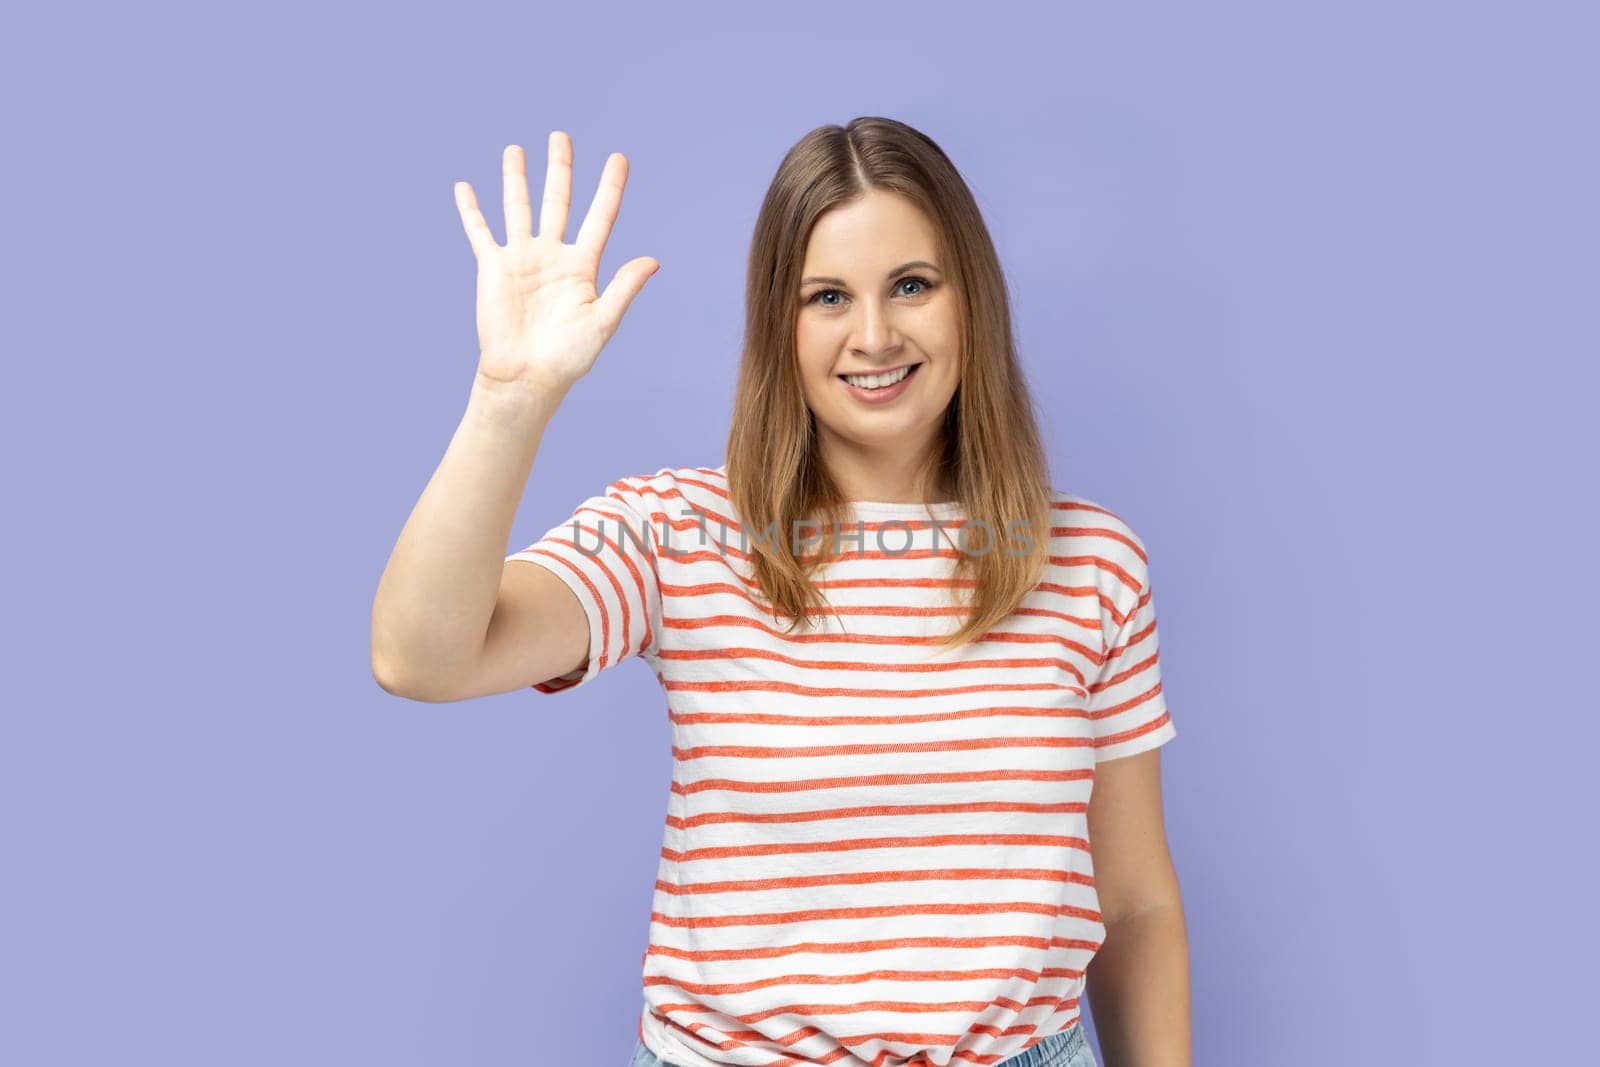 Portrait of friendly positive blond woman wearing striped T-shirt smiles toothily, raises palm greets friend, saying hello or goodbye. Indoor studio shot isolated on purple background.